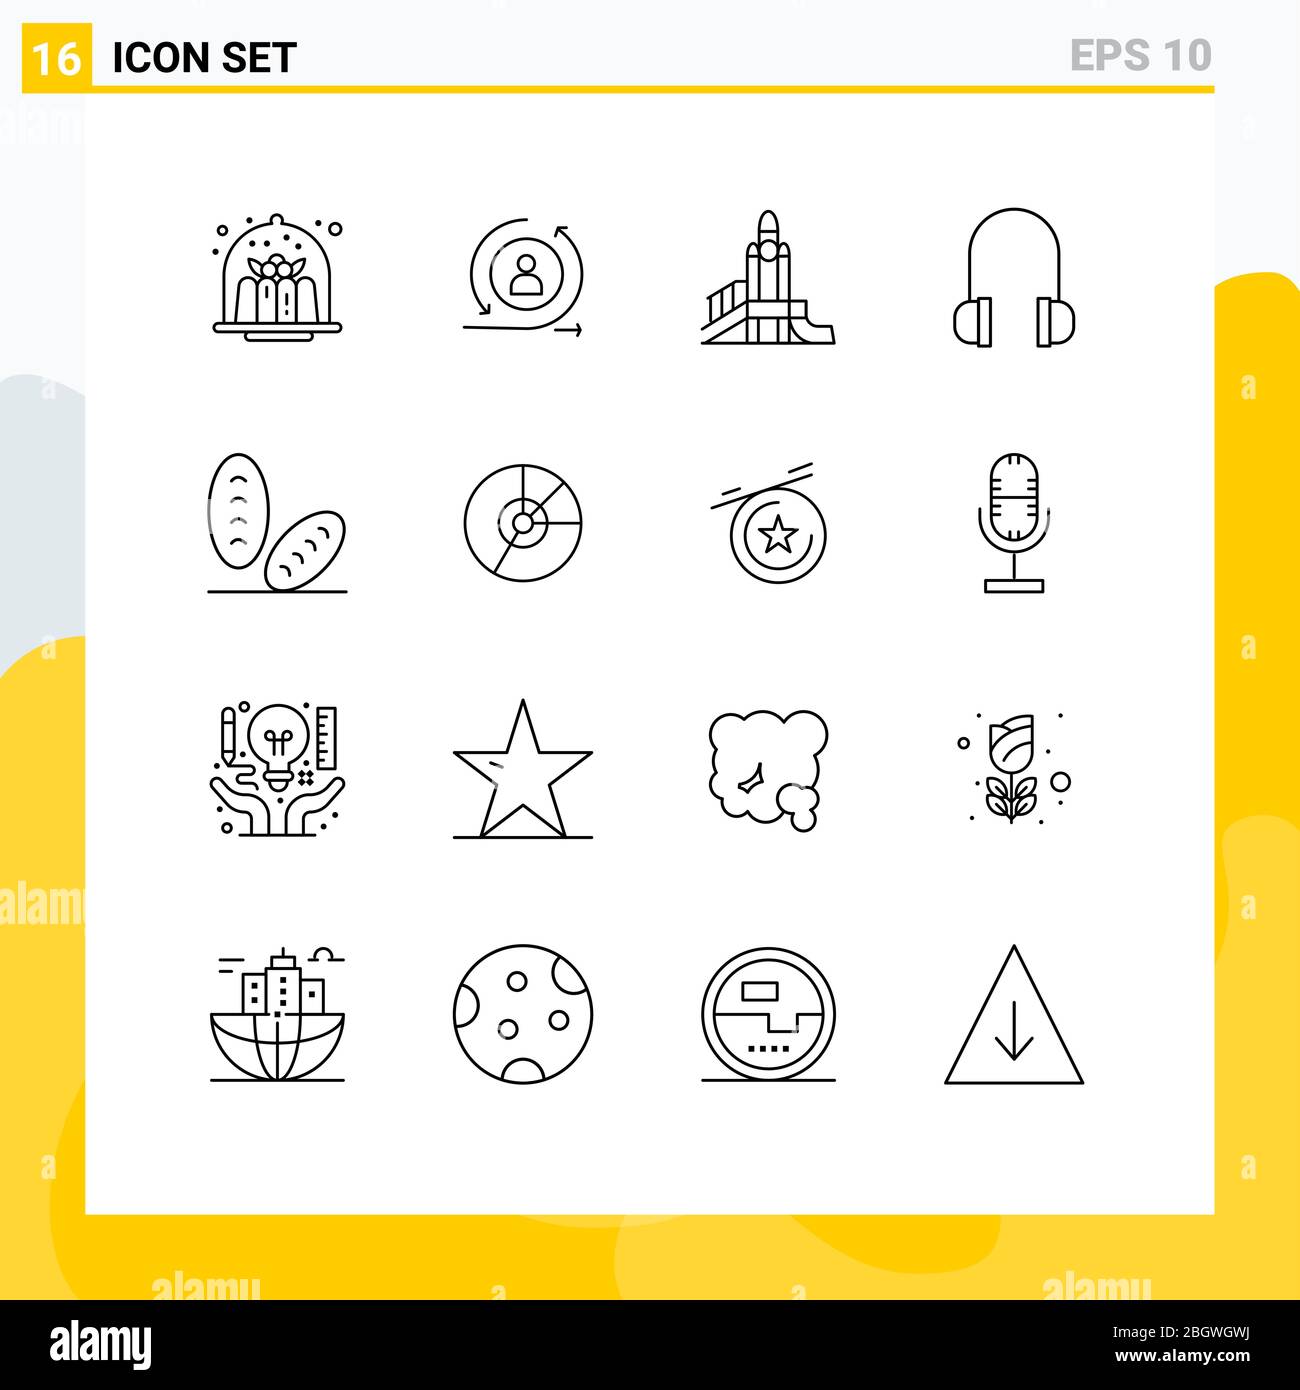 16 Creative Icons Modern Signs and Symbols of baguette, headset, digital, headphones, playground Editable Vector Design Elements Stock Vector